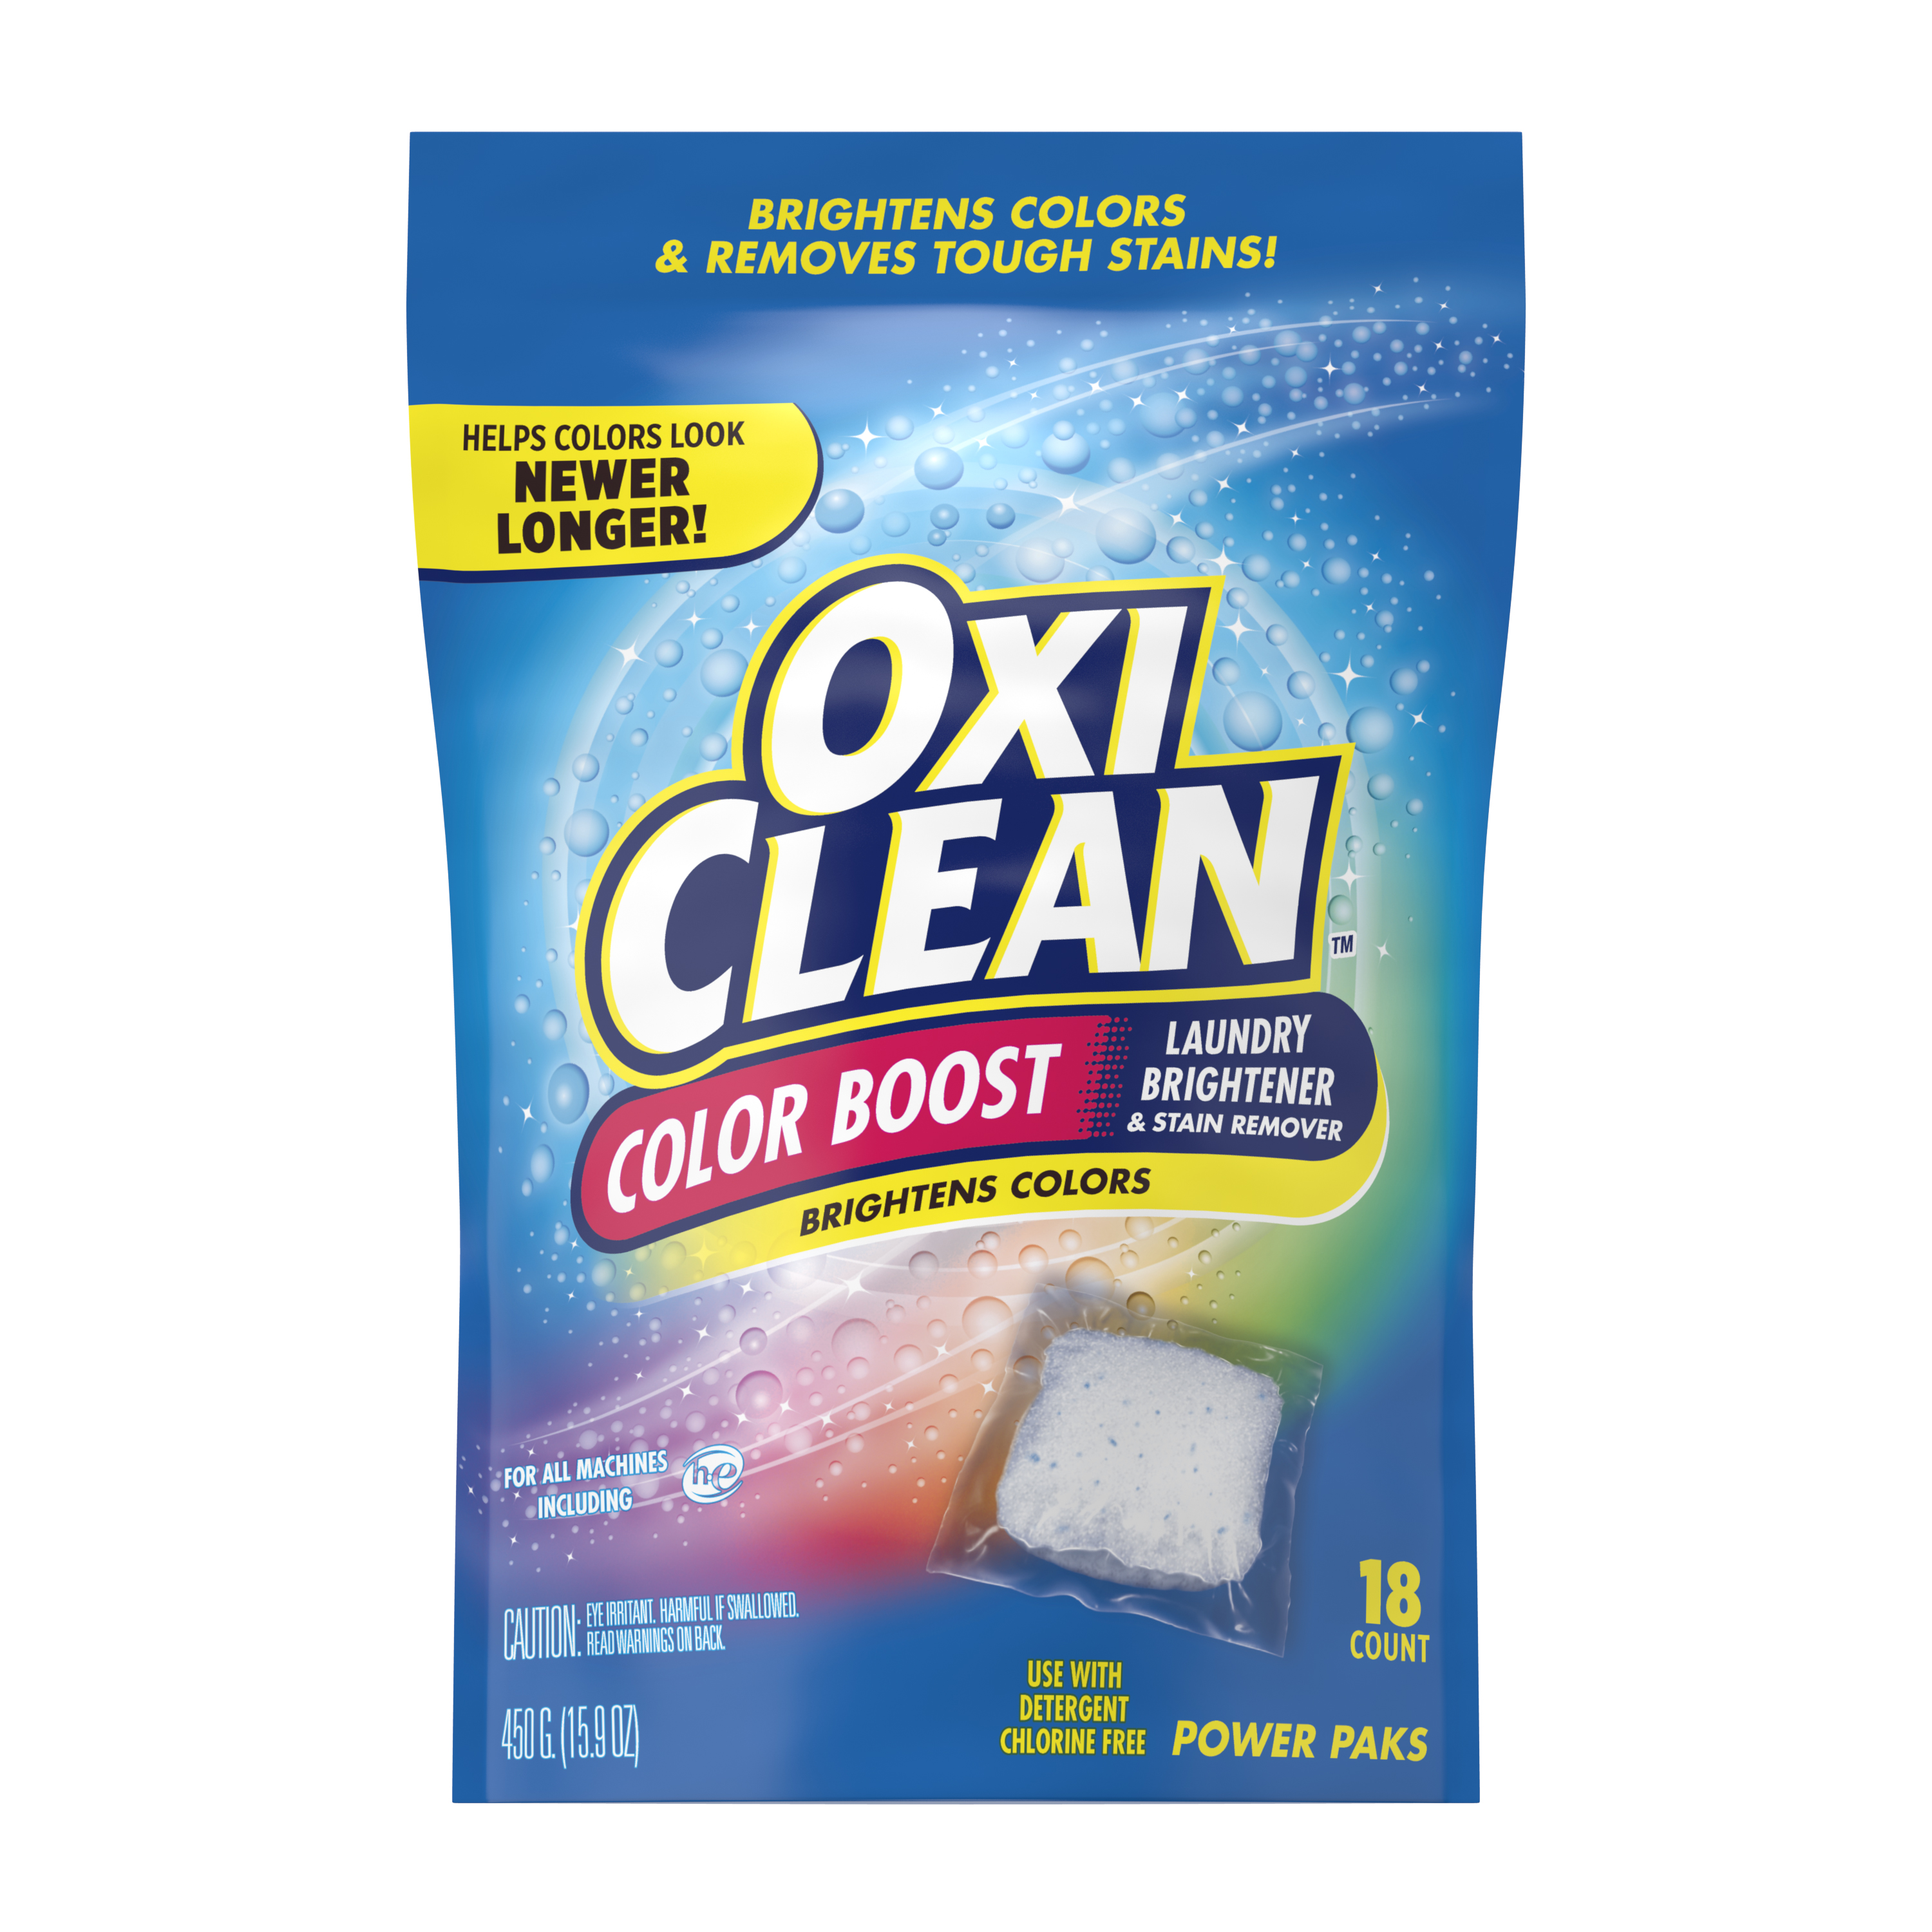 OxiClean, Color Boost Brightener + Stain Remover 18 ct Paks